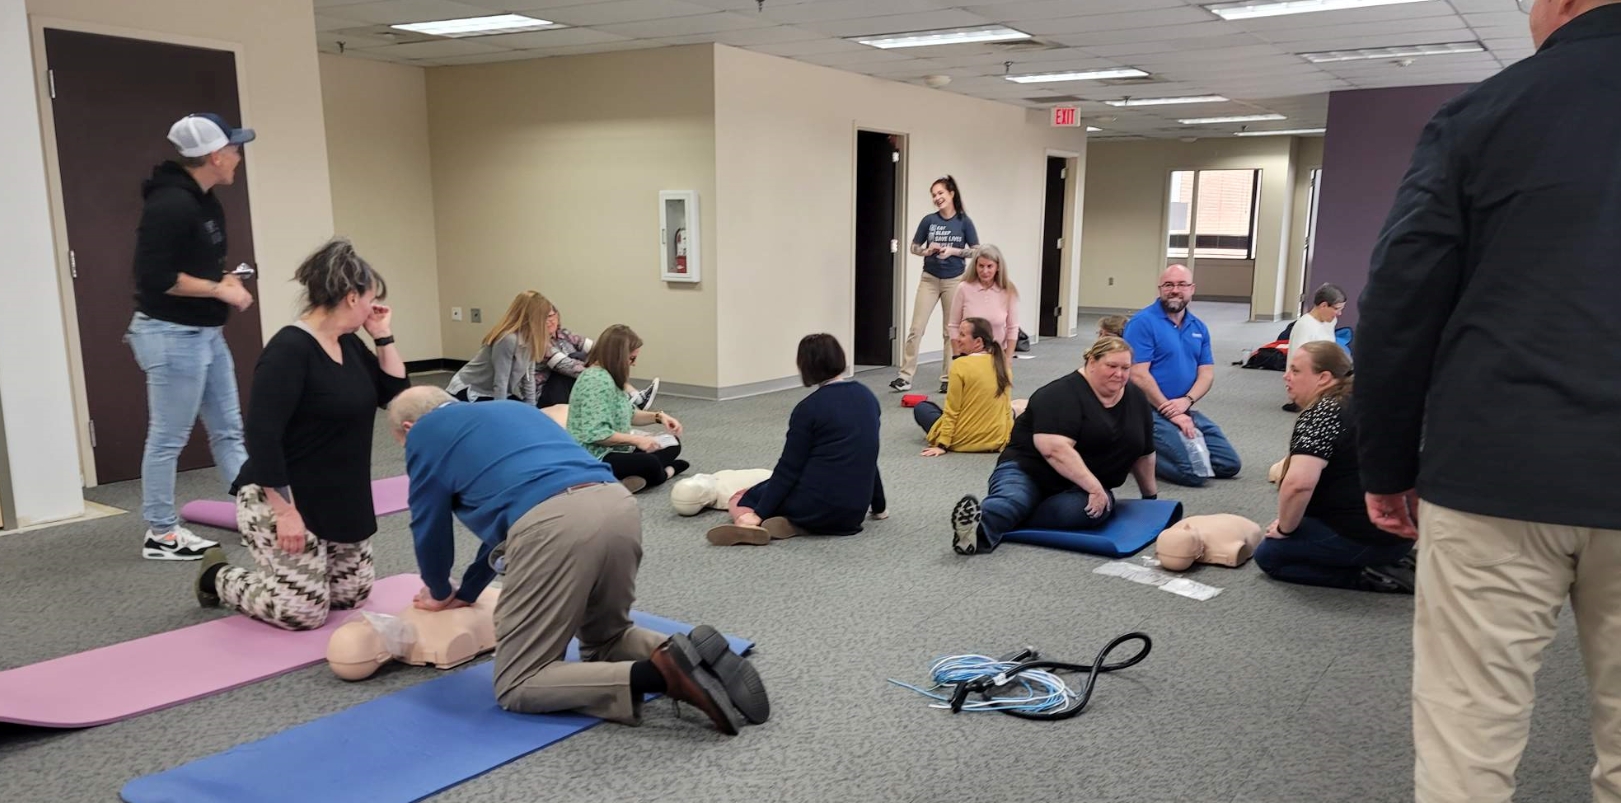 CPR Certification is one of the many opportunities Pinnacle offers as part of its holistic wellness focus.